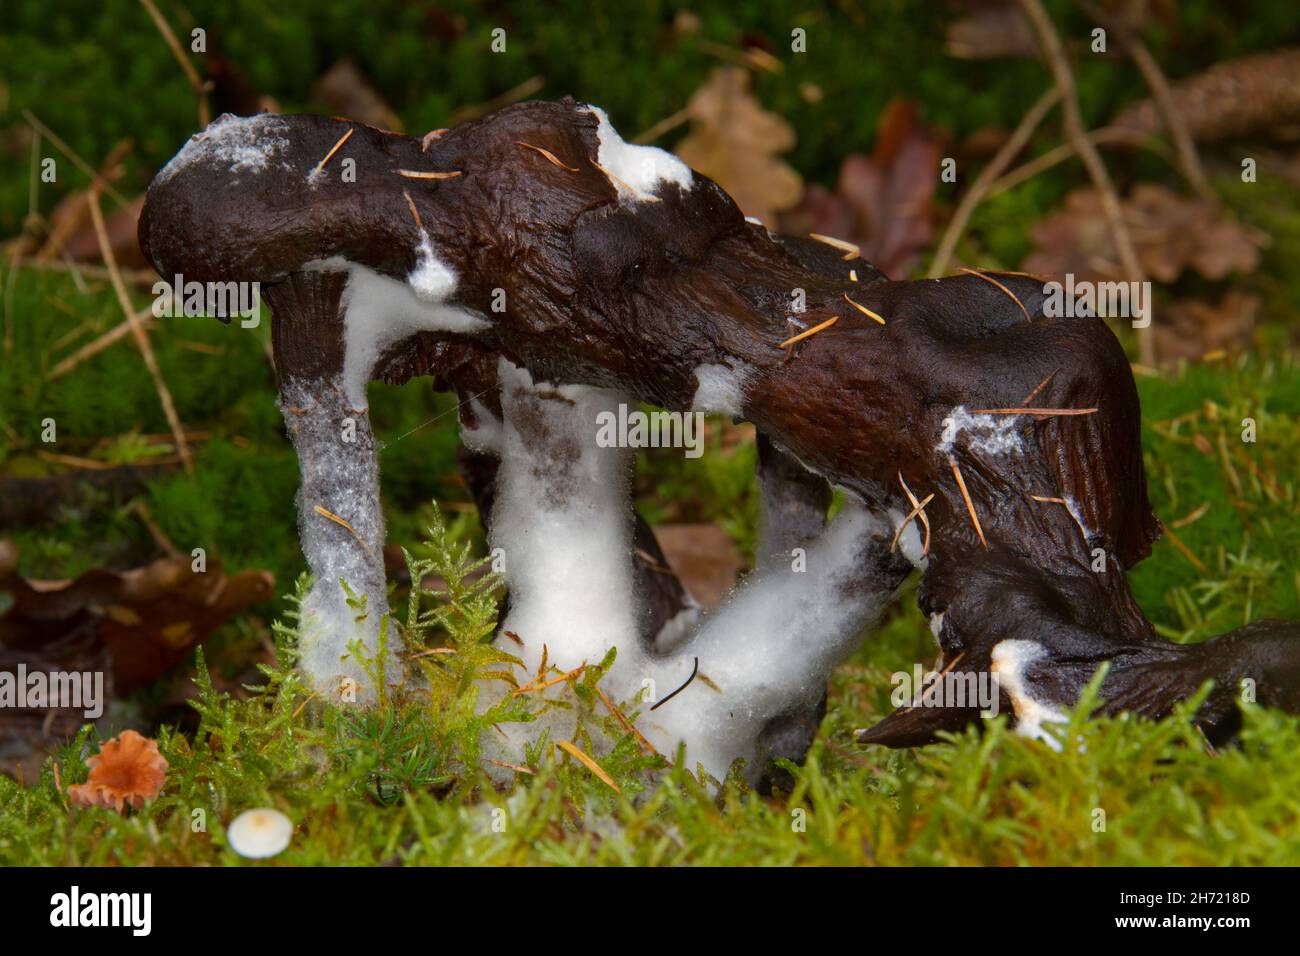 Moldy mushrooms growing in moss in a forest Stock Photo